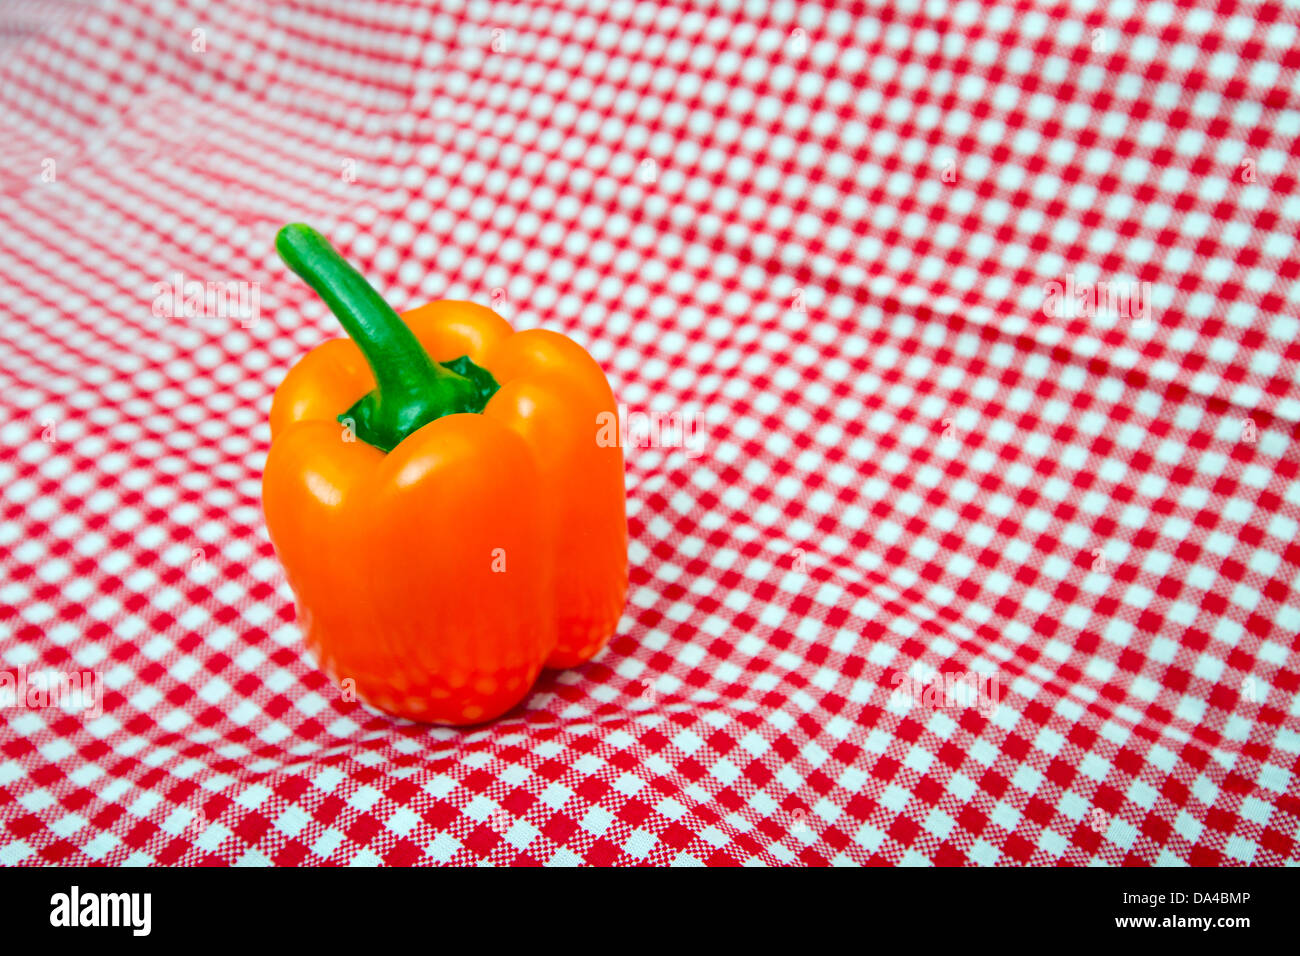 Orange Bell Pepper against red and white chequered cloth Stock Photo